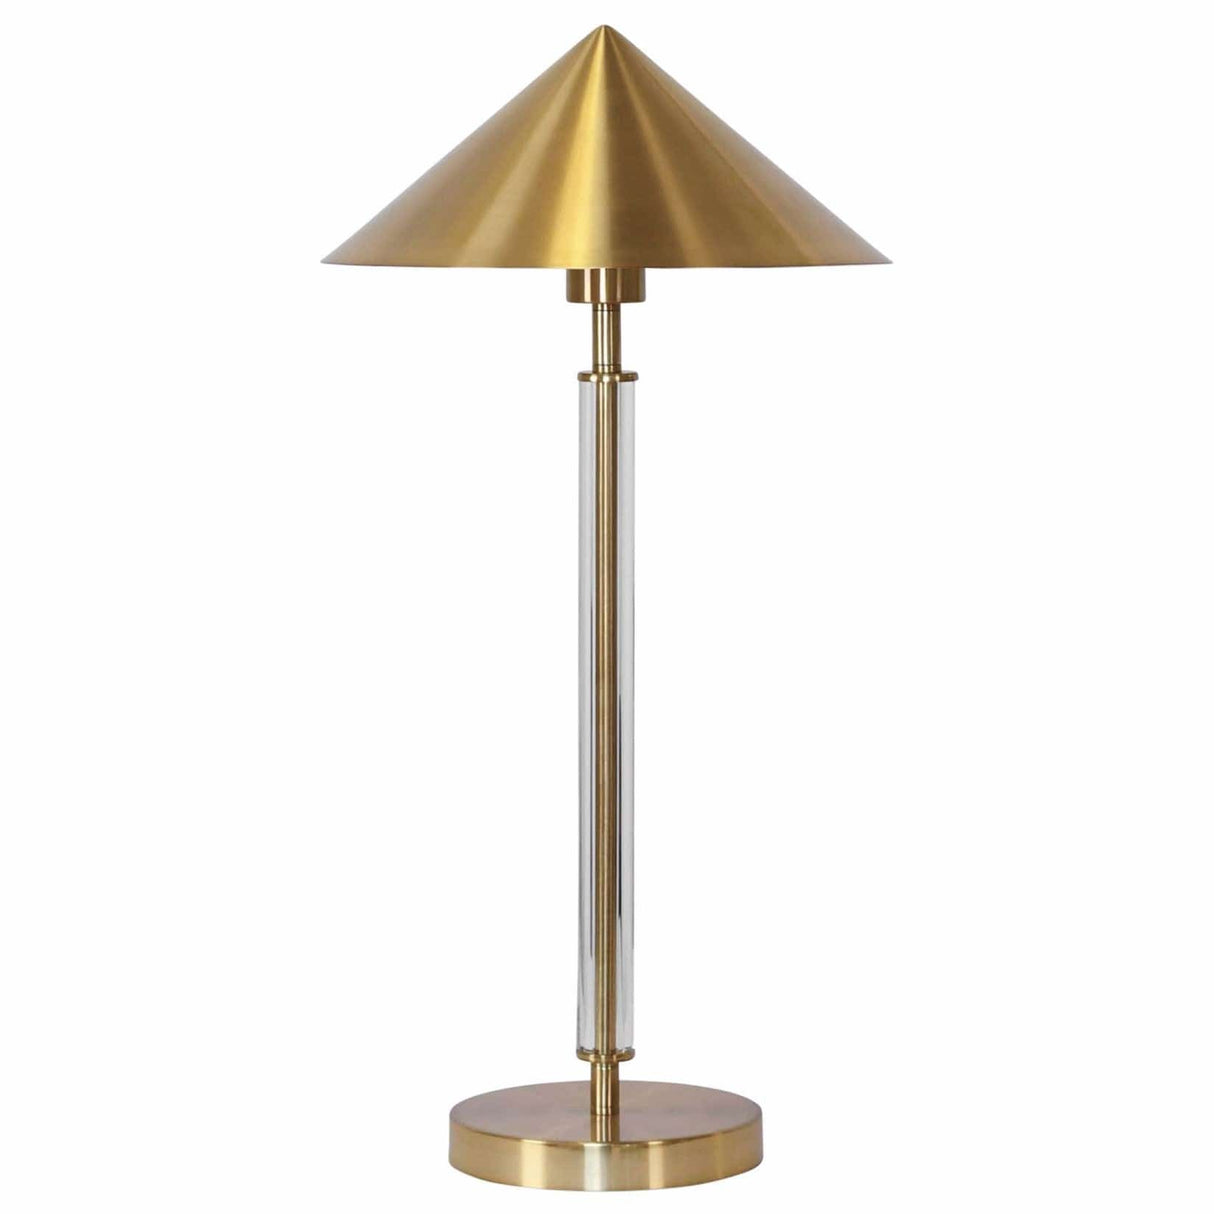 TATE TABLE LAMP Table Lamps TATE ABR